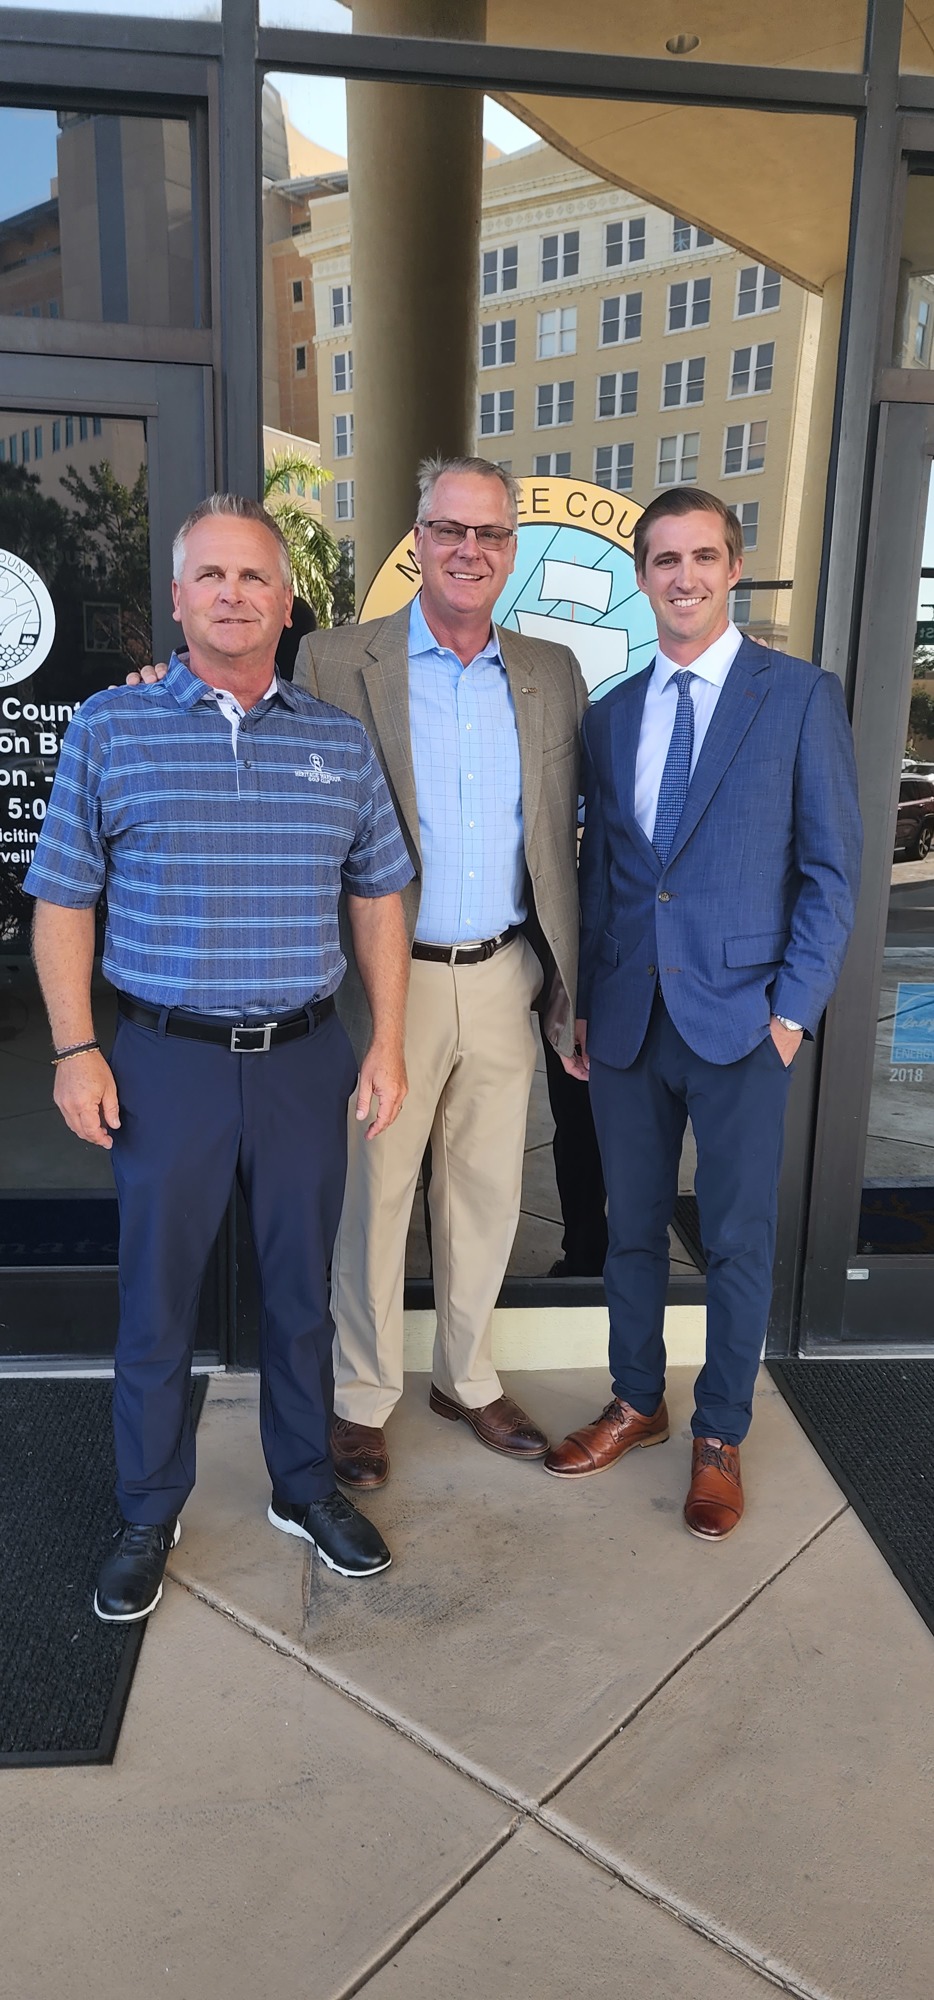 Heritage Harbour's Rick Nelson and Mark Bruce, and their attorney Kyle Grimes, are all smiles after their Heritage Harbour Golf Resort plan was approved by the Manatee County Commission.